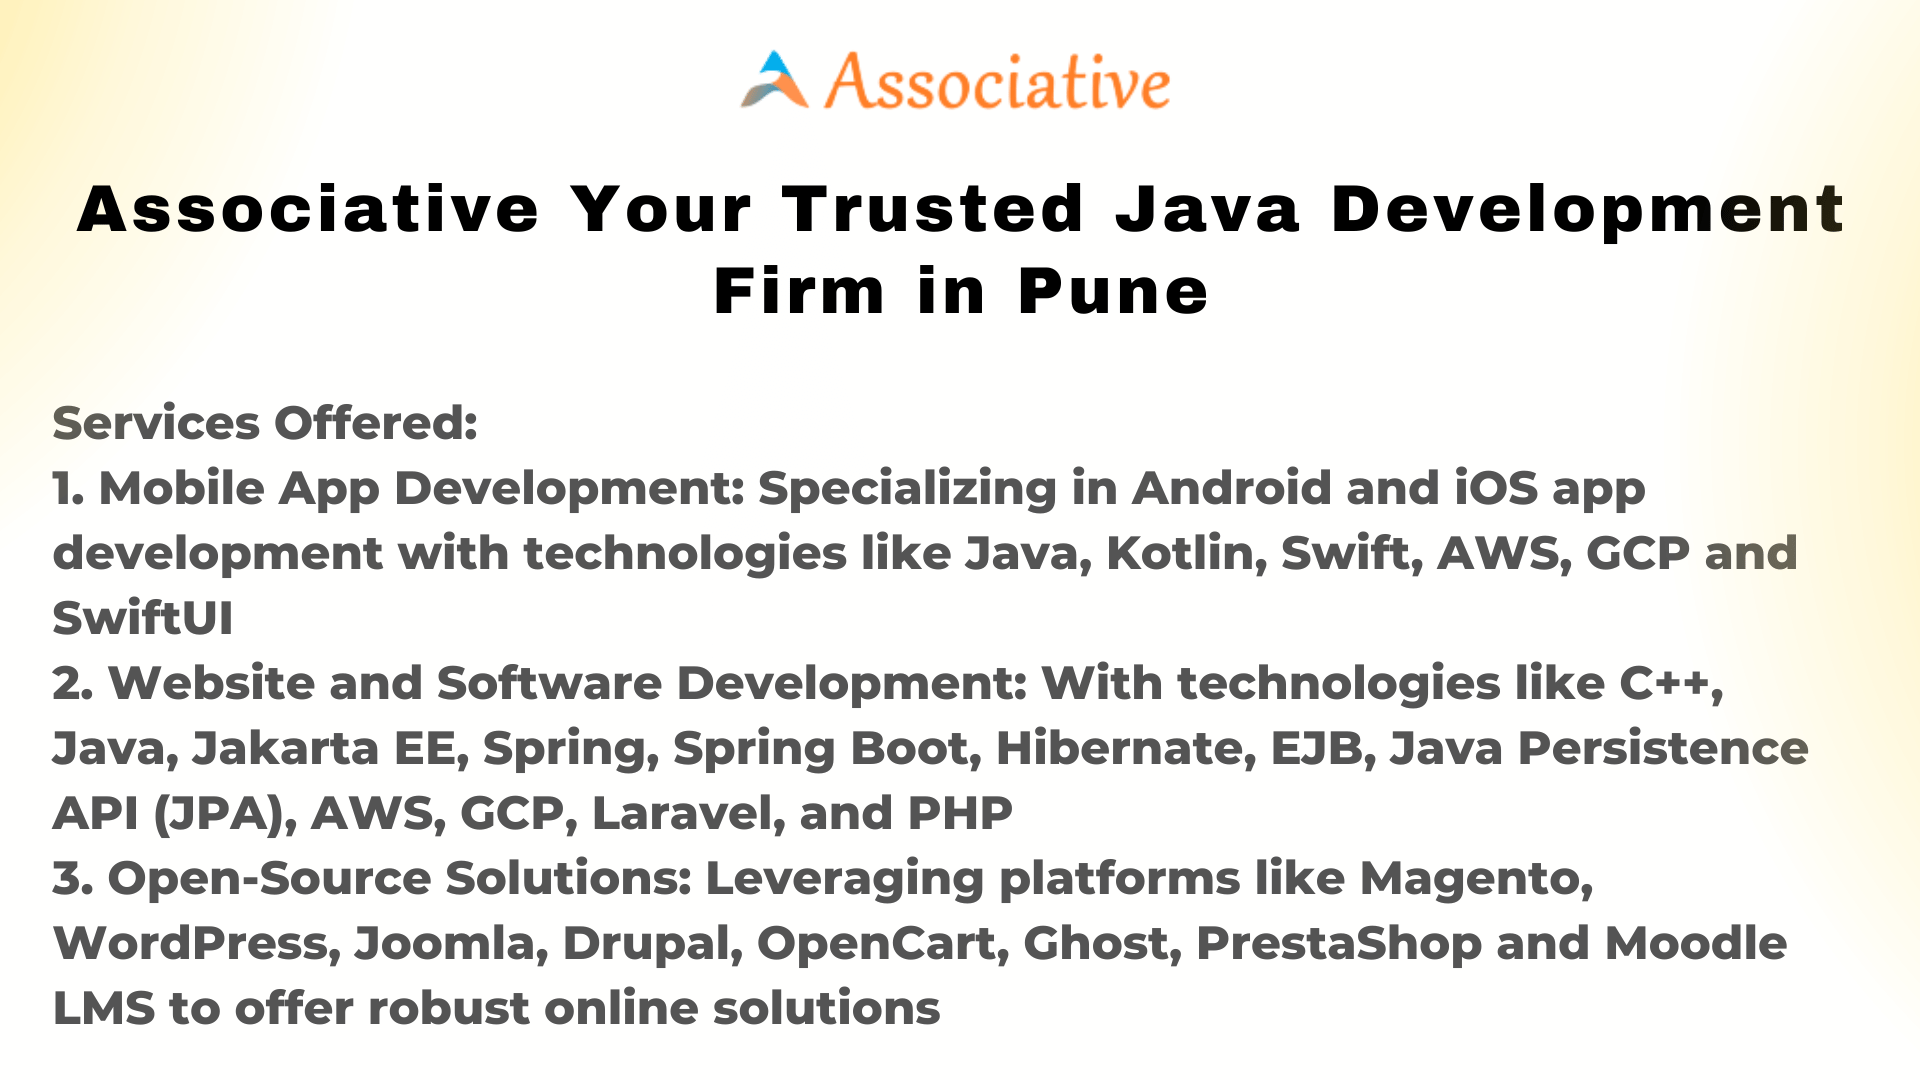 Associative Your Trusted Java Development Firm in Pune